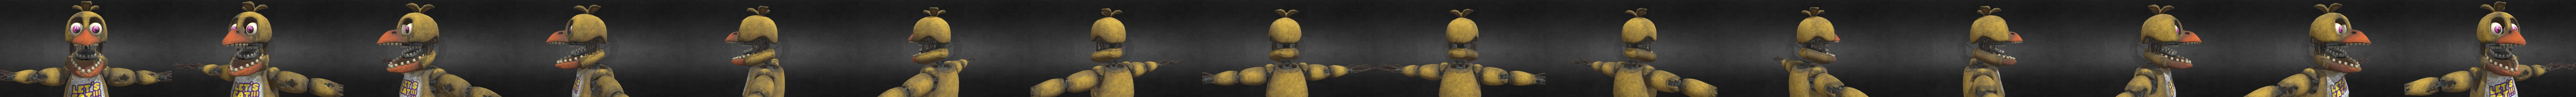 Withered Chica - Download Free 3D model by animator12 (@animator12